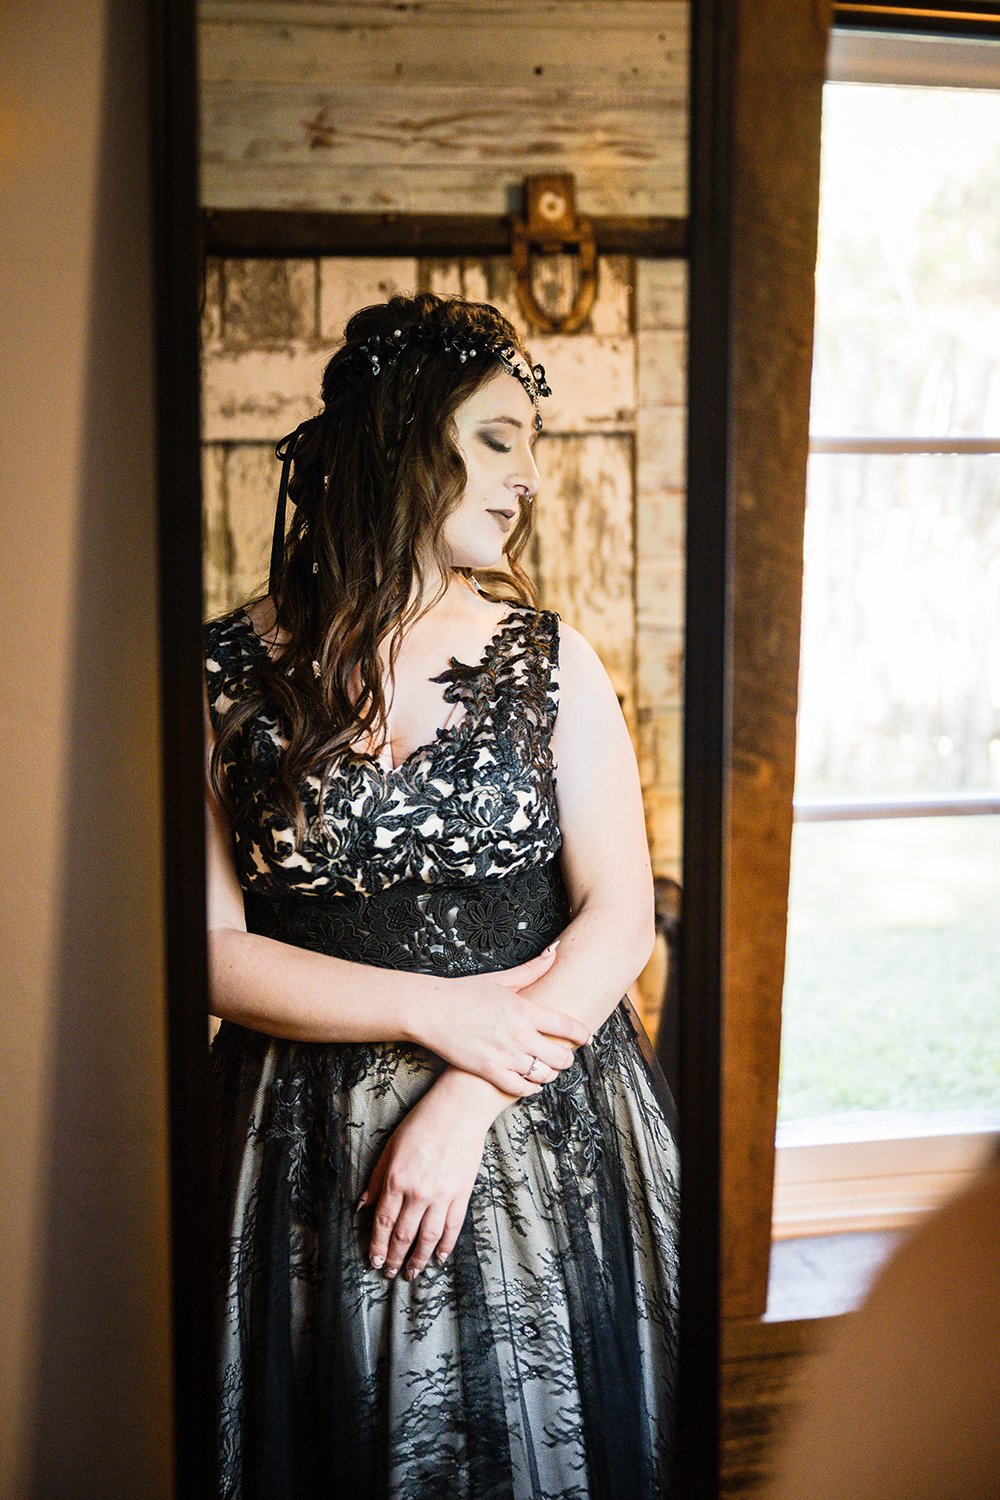 A lesbian marrier wearing a black wedding dress and a black headpiece stands in front of a mirror inside of a Roanoke Airbnb on her elopement day.